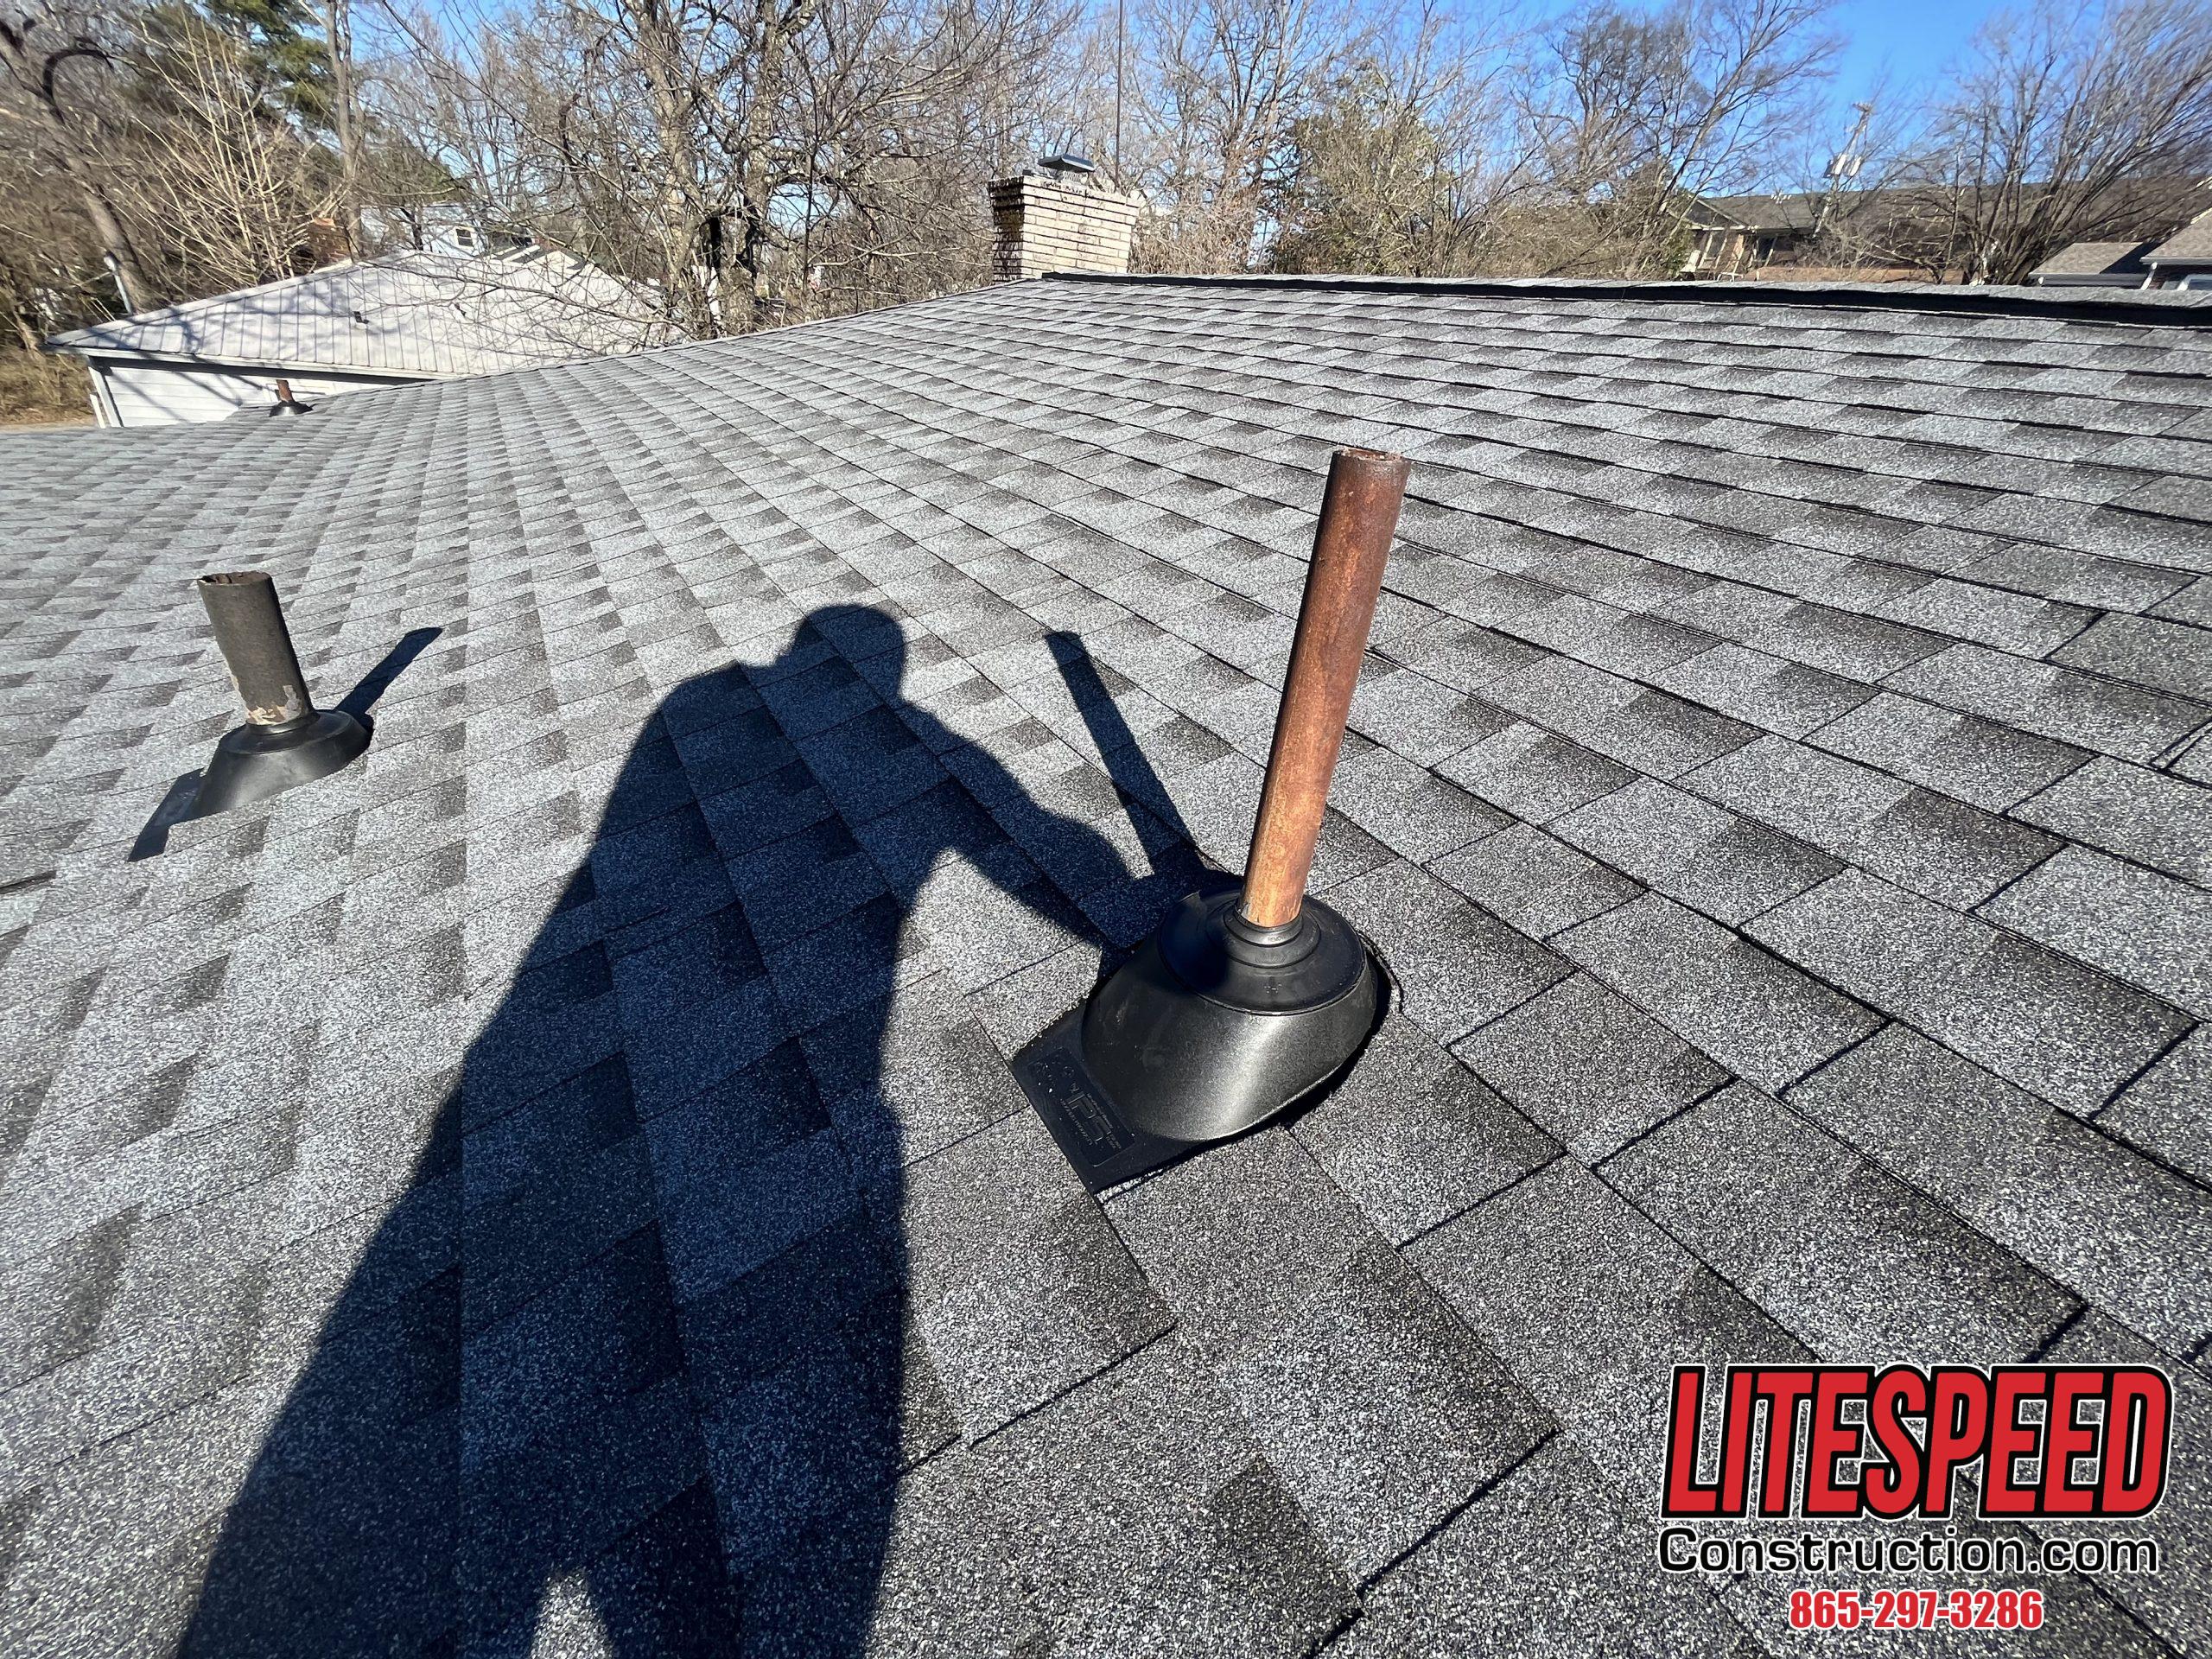 This is a picture of a pipe boot on a gray shingle roof